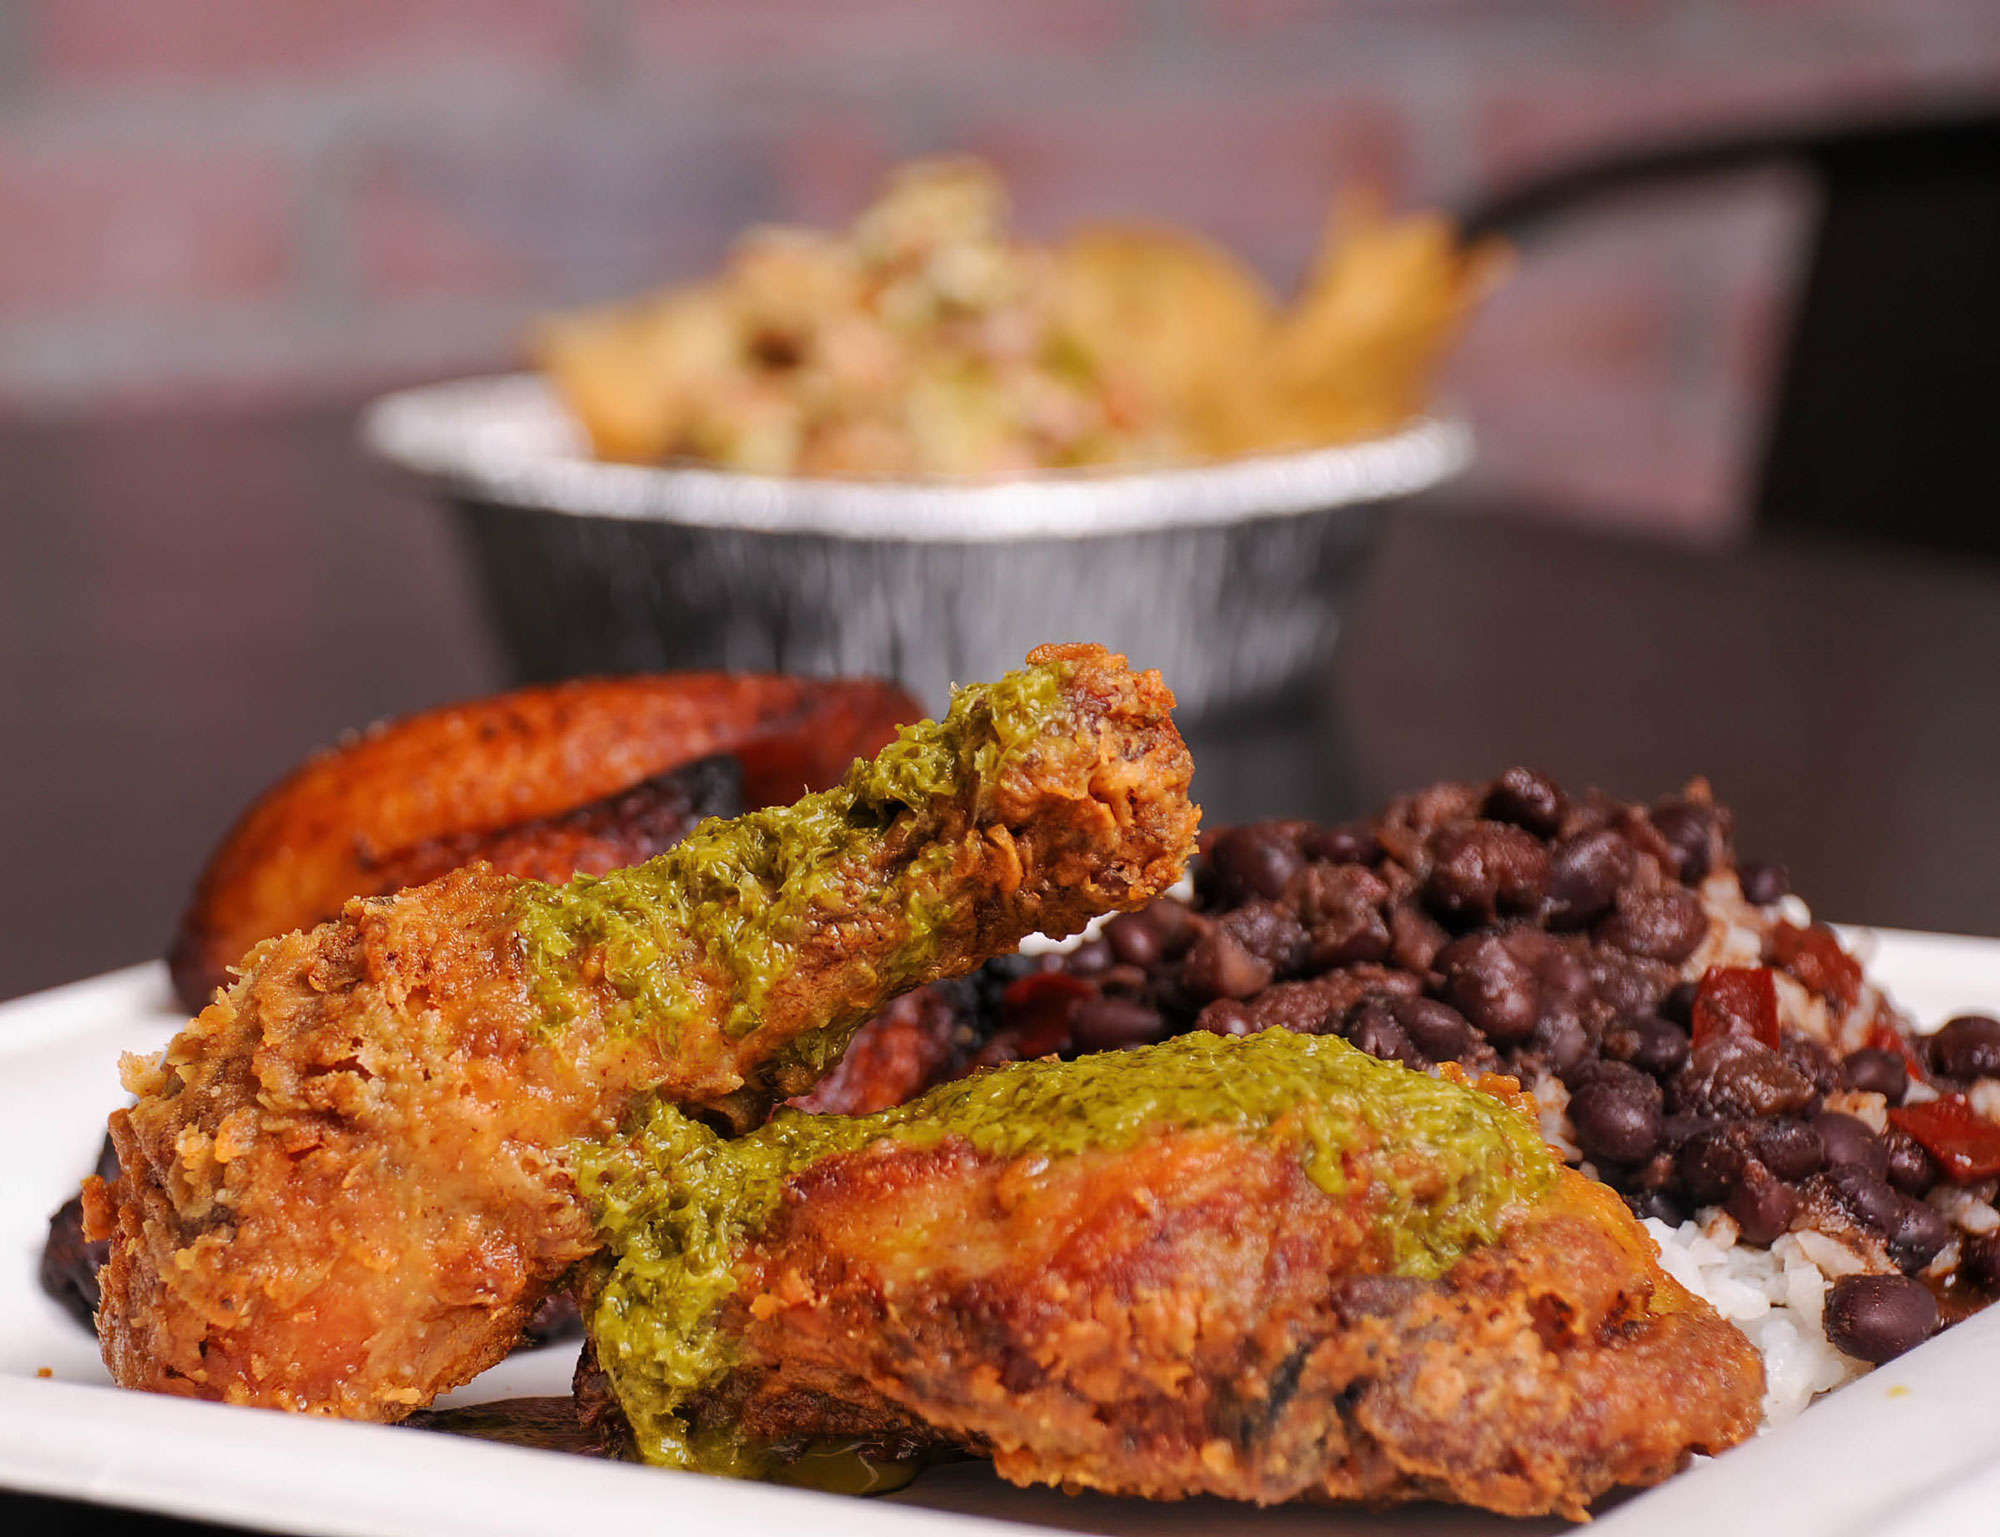 A Latin/Cuban dish of grilled chicken available from Winston Salem's Latin Restaurant, Mojito Latin Soul Food.